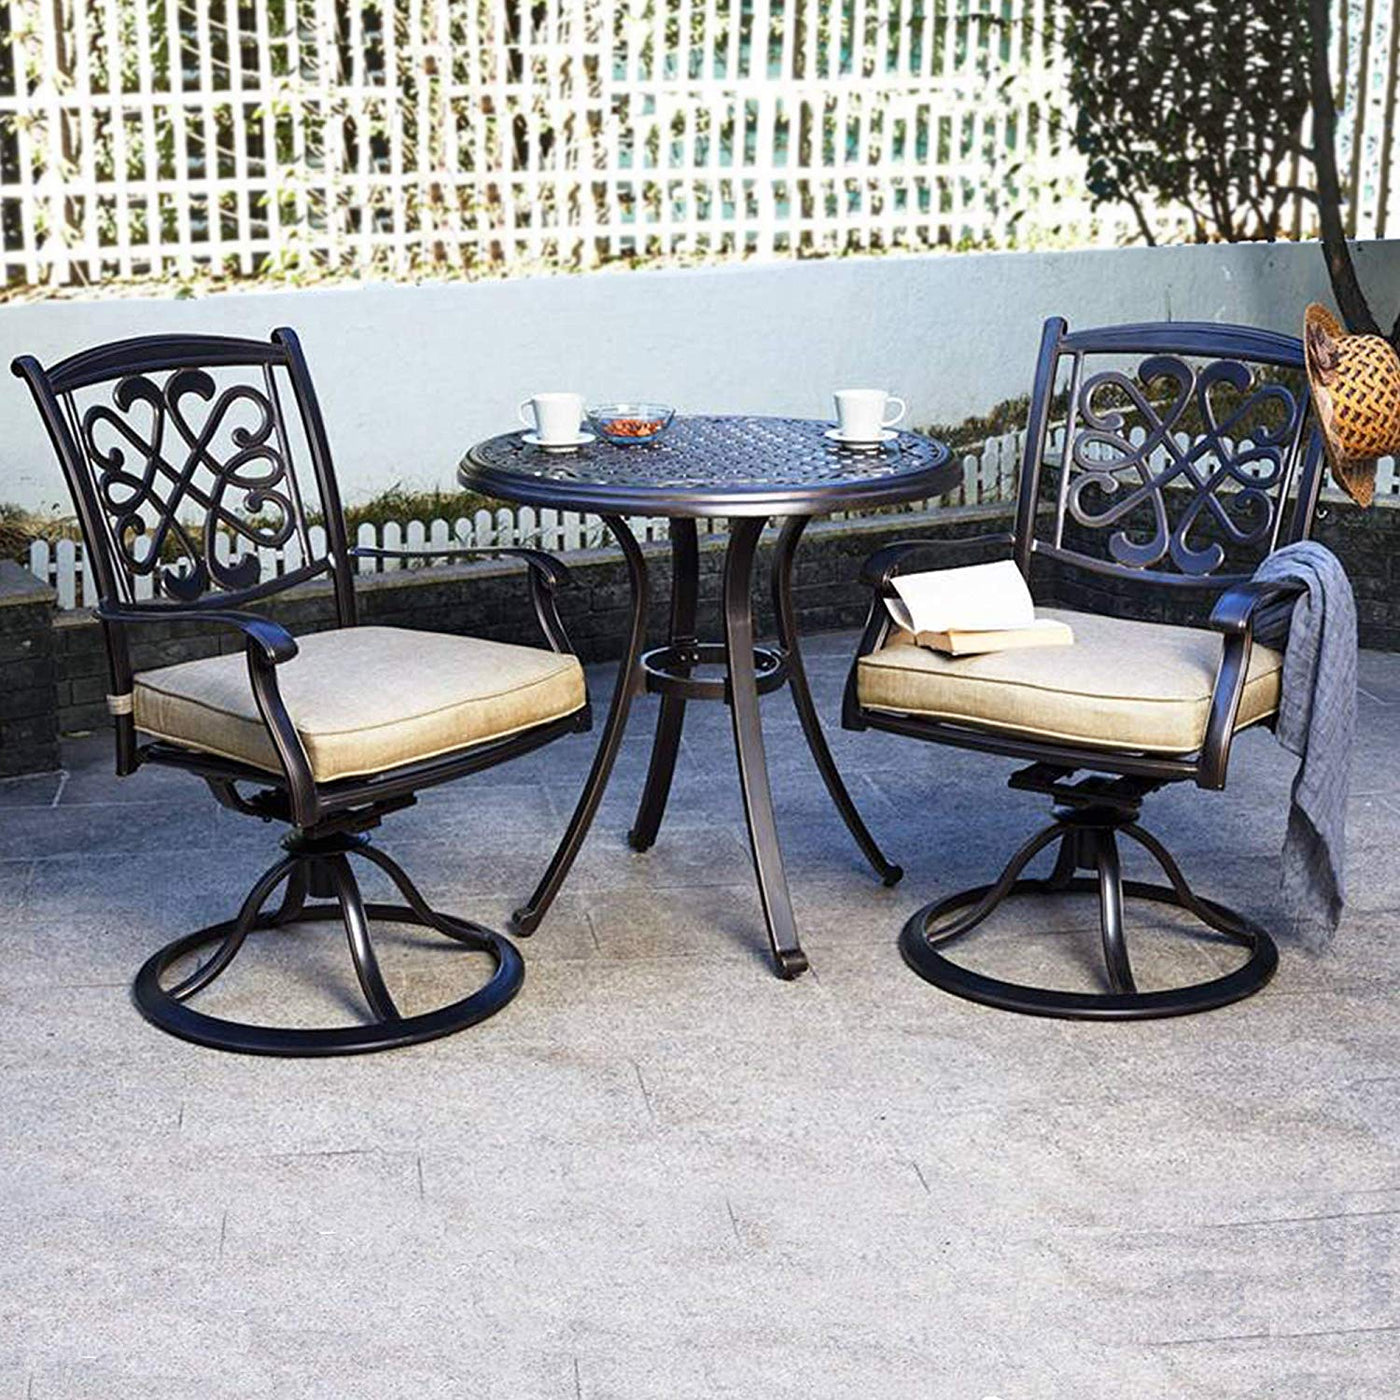 Bistro Table Chairs Aluminum Dining Table Glider Chairs Patio Furniture Set of 3